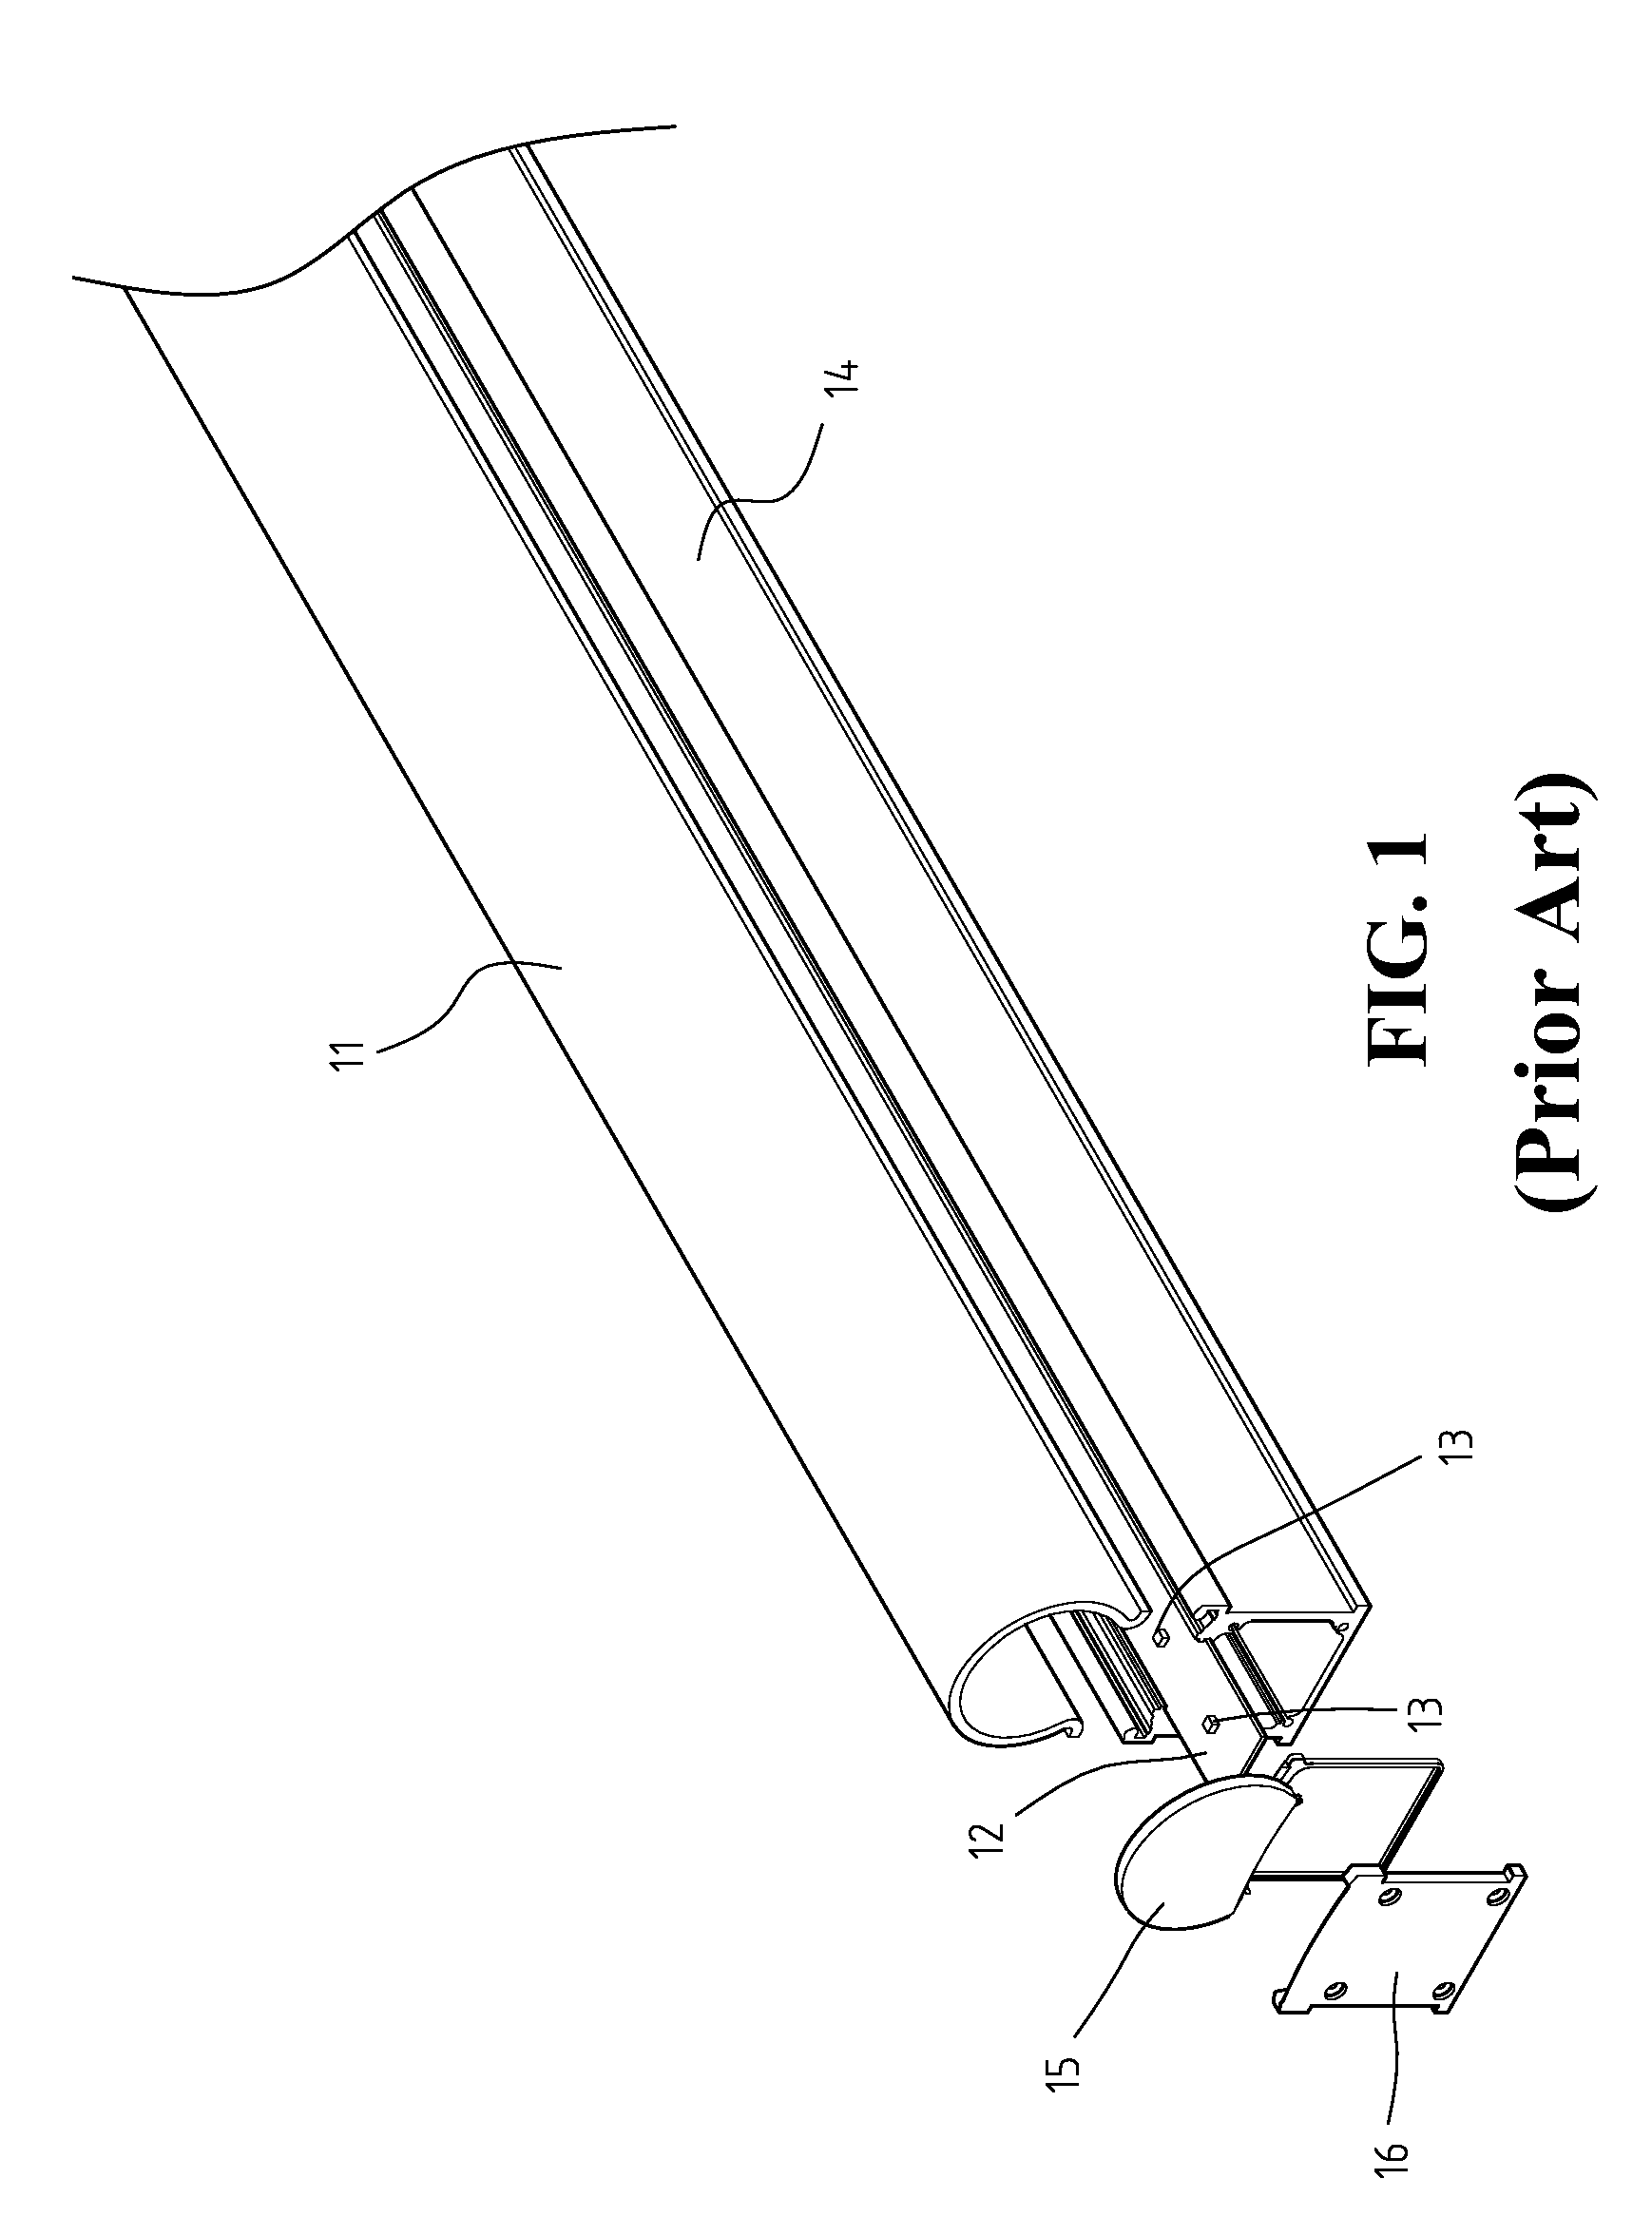 Structure for a high efficiency and water-proof lighting device